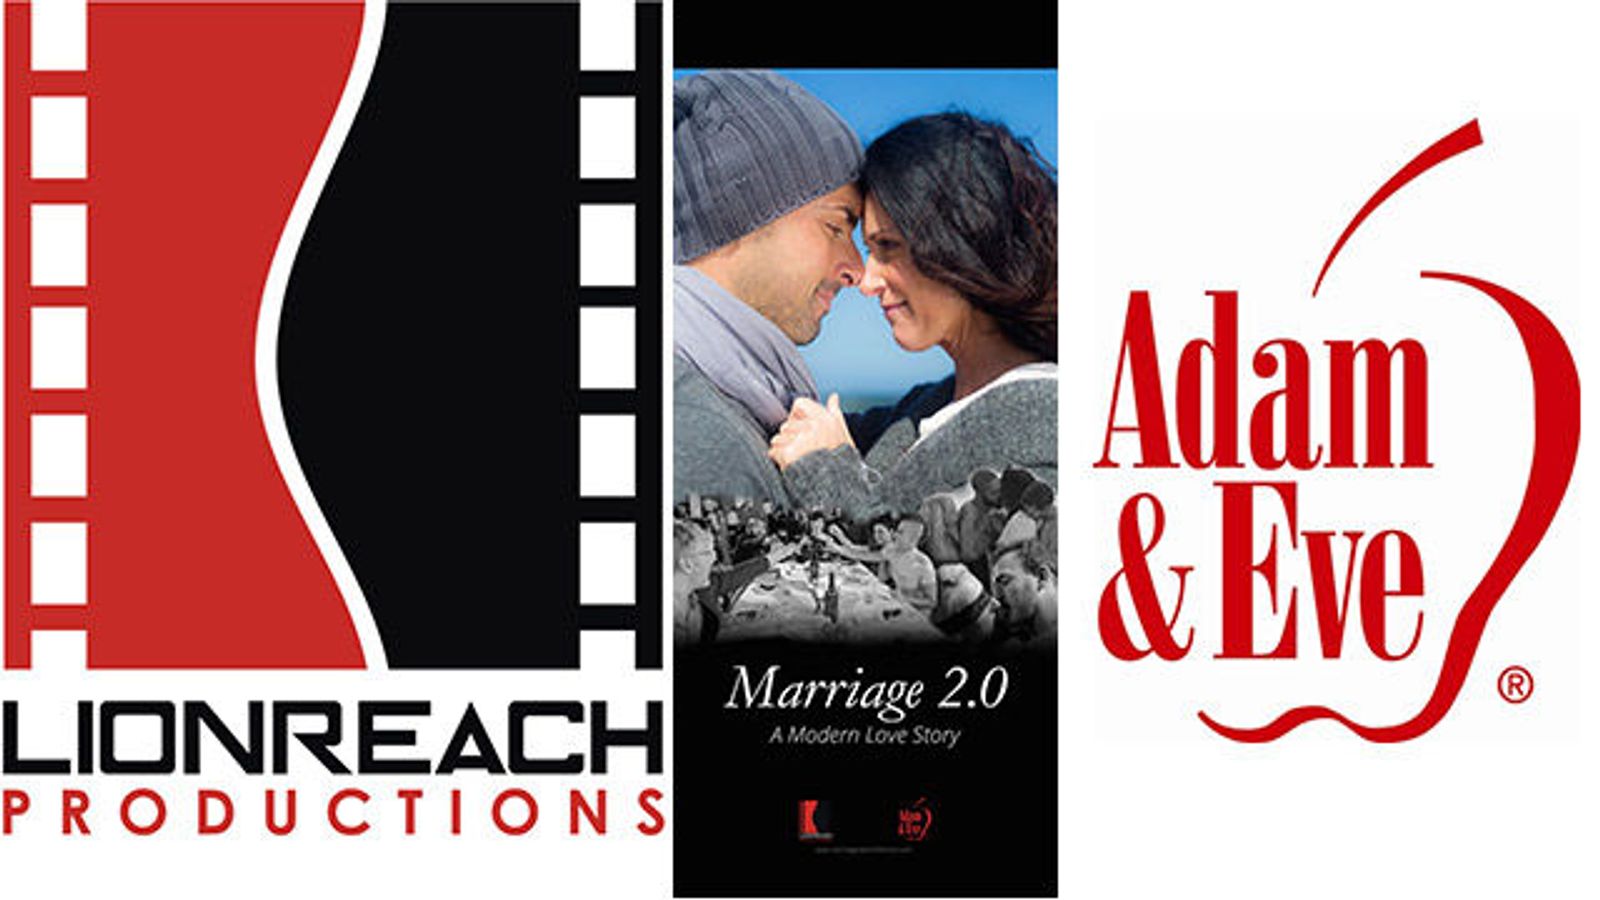 Lionreach's 'Marriage 2.0' Screened for UCSB Pop Culture Class